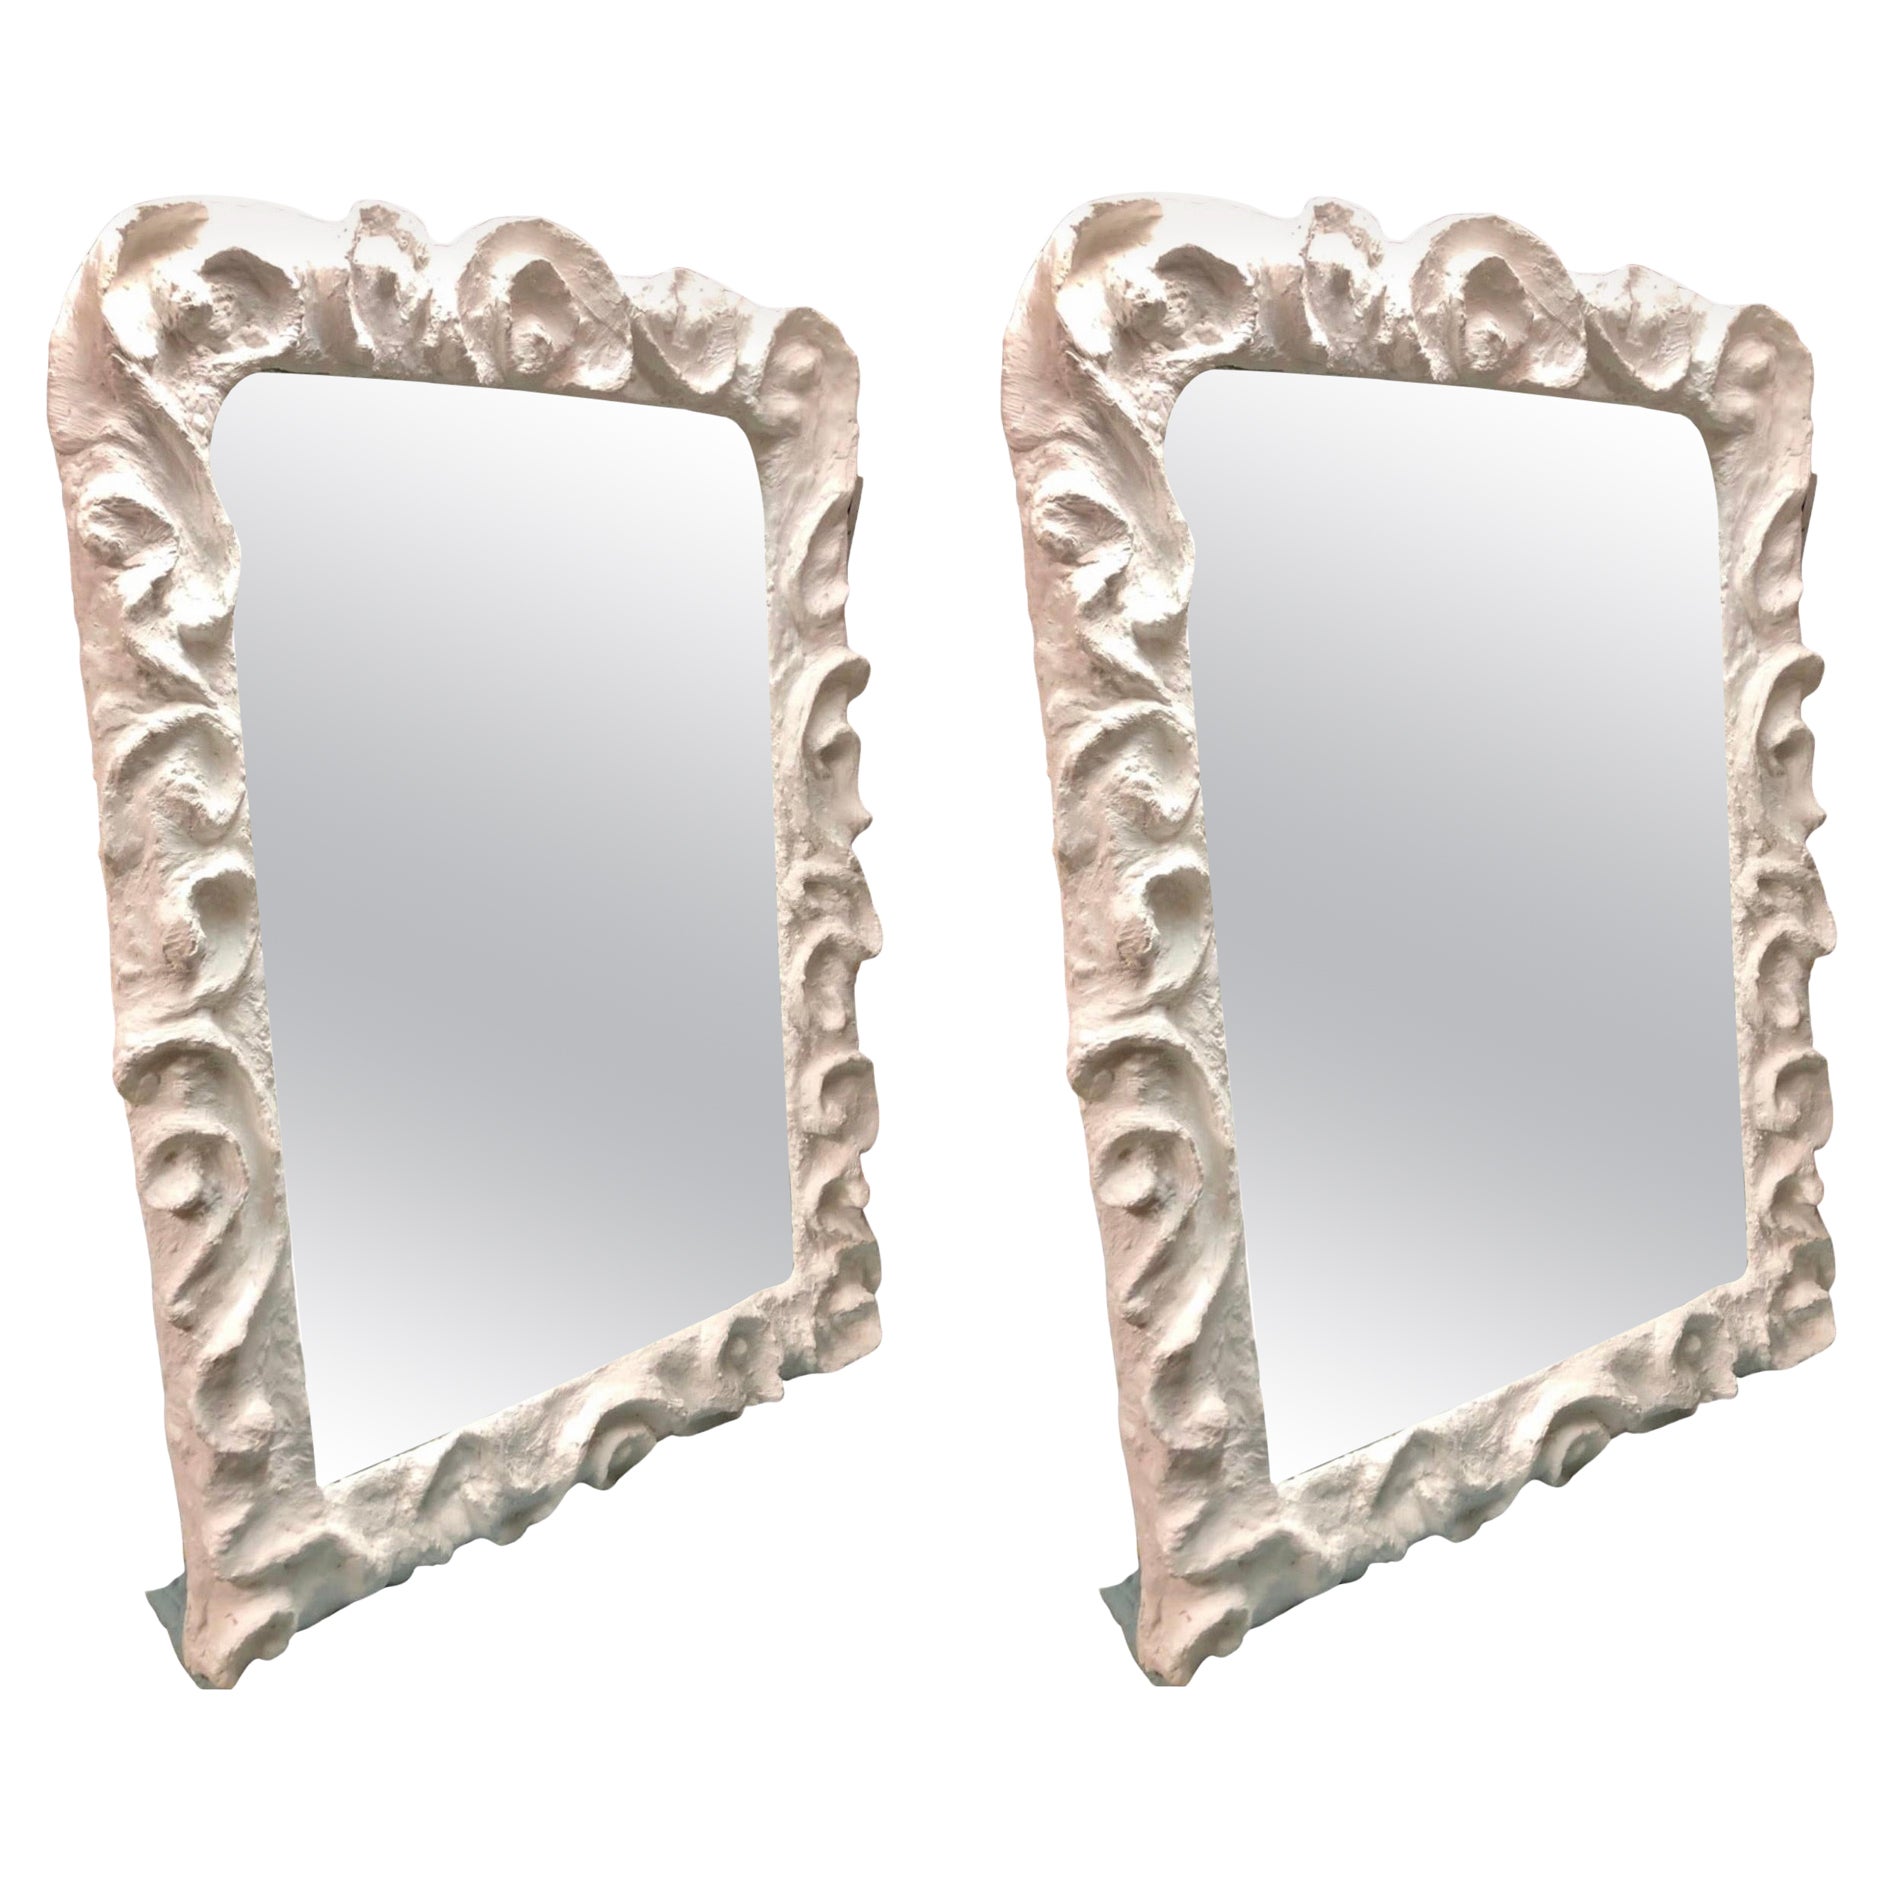 2 French Hand-Crafted Plaster Mirrors